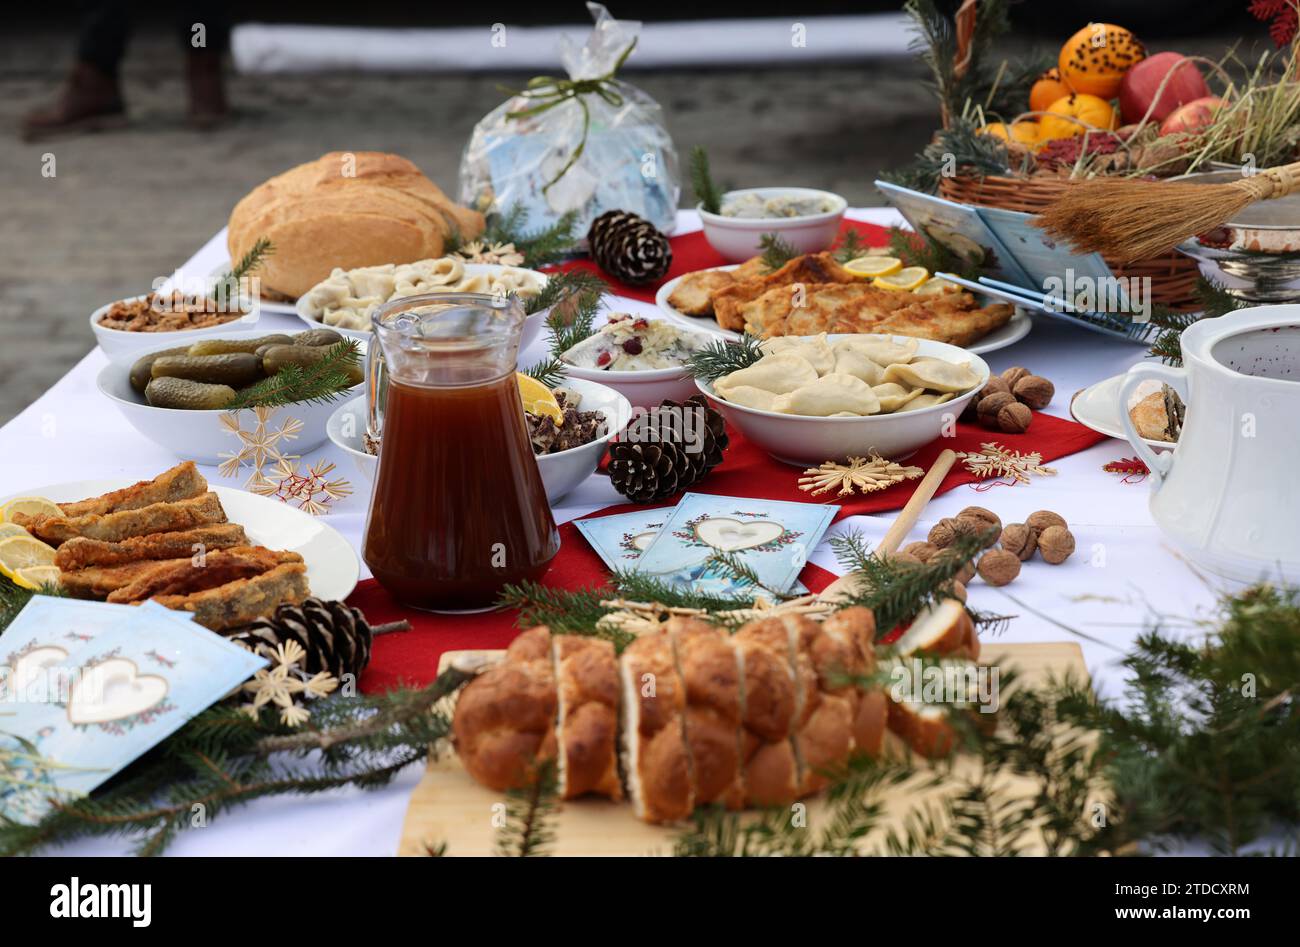 Christmas food on the table decorating with a white tablecloth Stock Photo